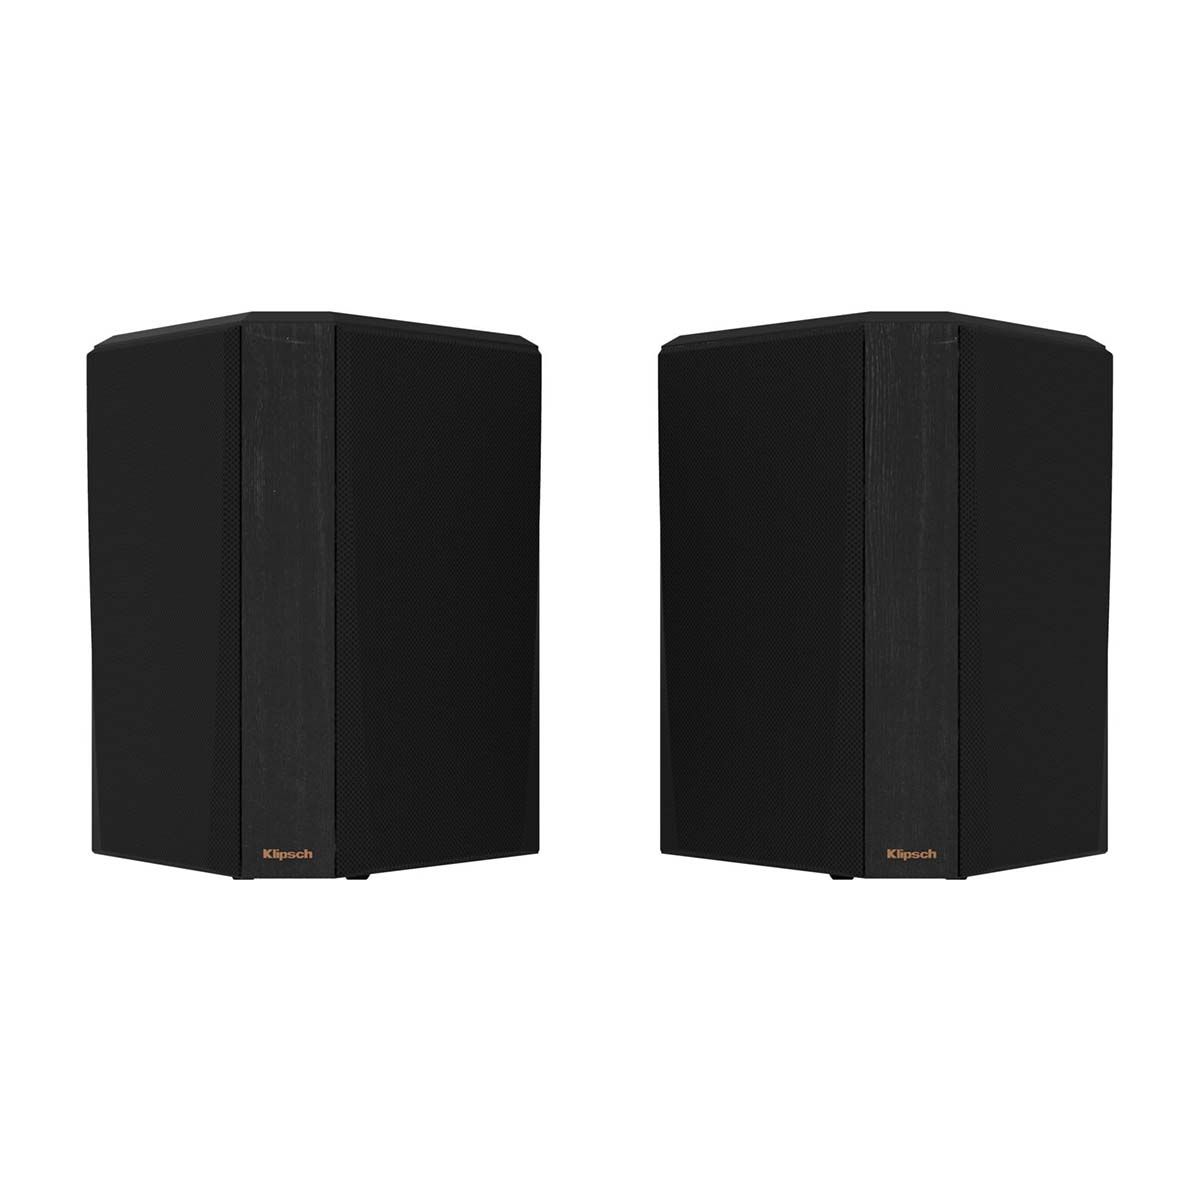 Klipsch RP-502S II Surround Speakers - Ebony - front view of pair with grills